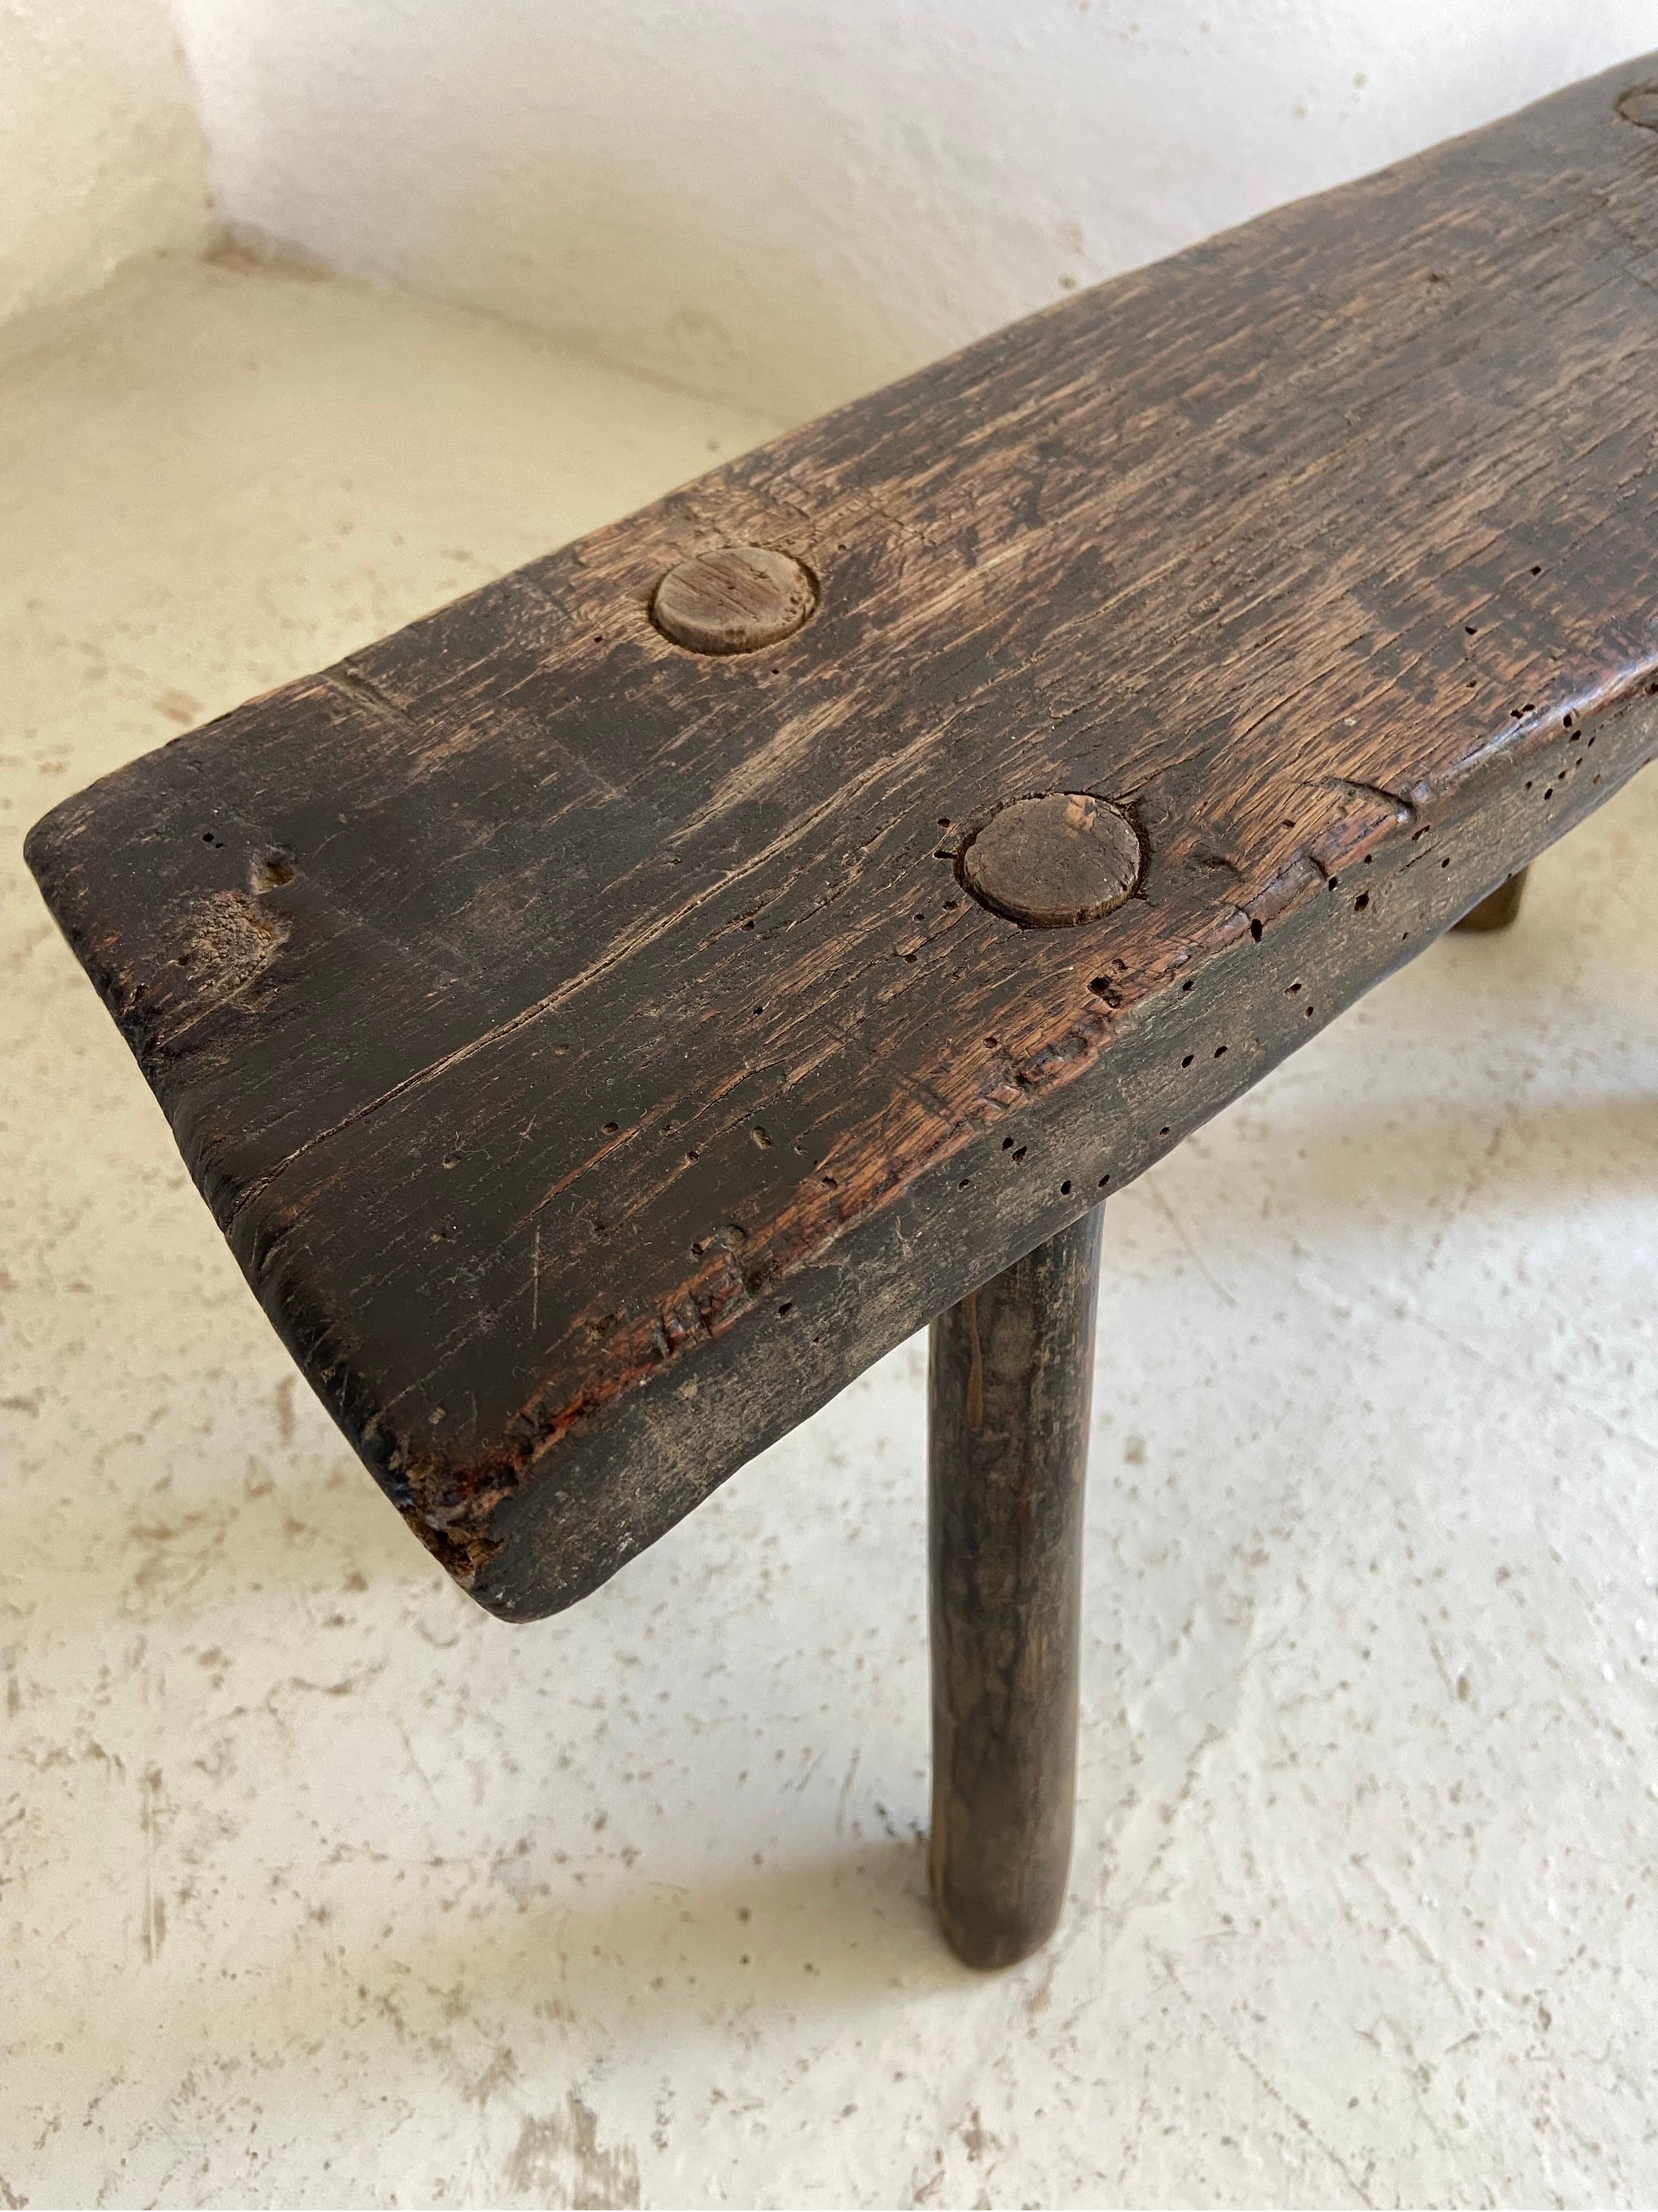 Early 20th century mesquite hardwood stool from Guanajuato, Mexico. Strong patina is evident in the photos. Legs are intact and secure. Most likely used as a work stool.